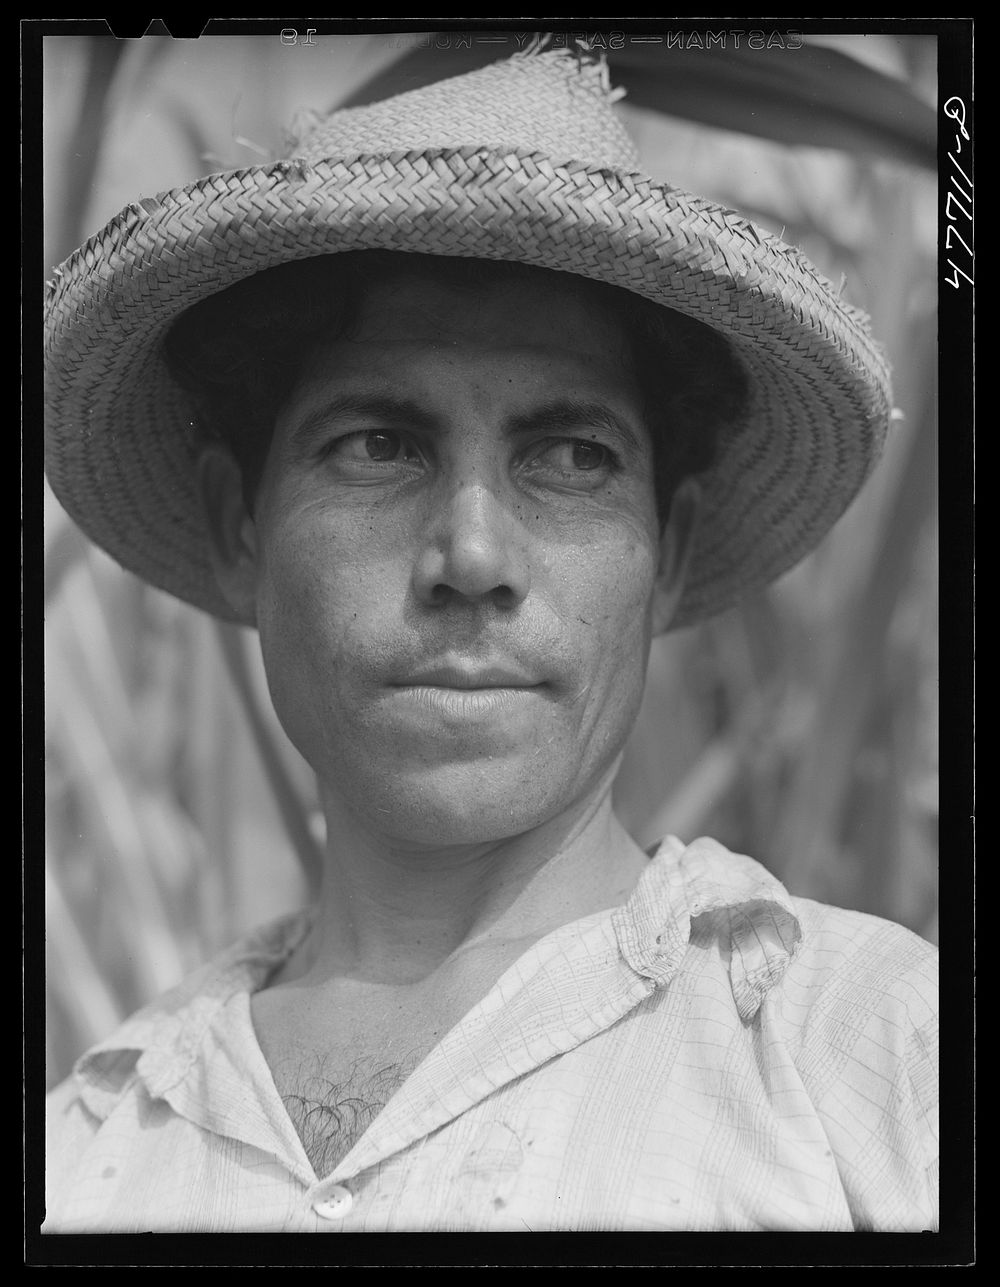 Yauco, Puerto Rico (vicinity). Farm laborer who was cutting cane in a sugar field. Sourced from the Library of Congress.